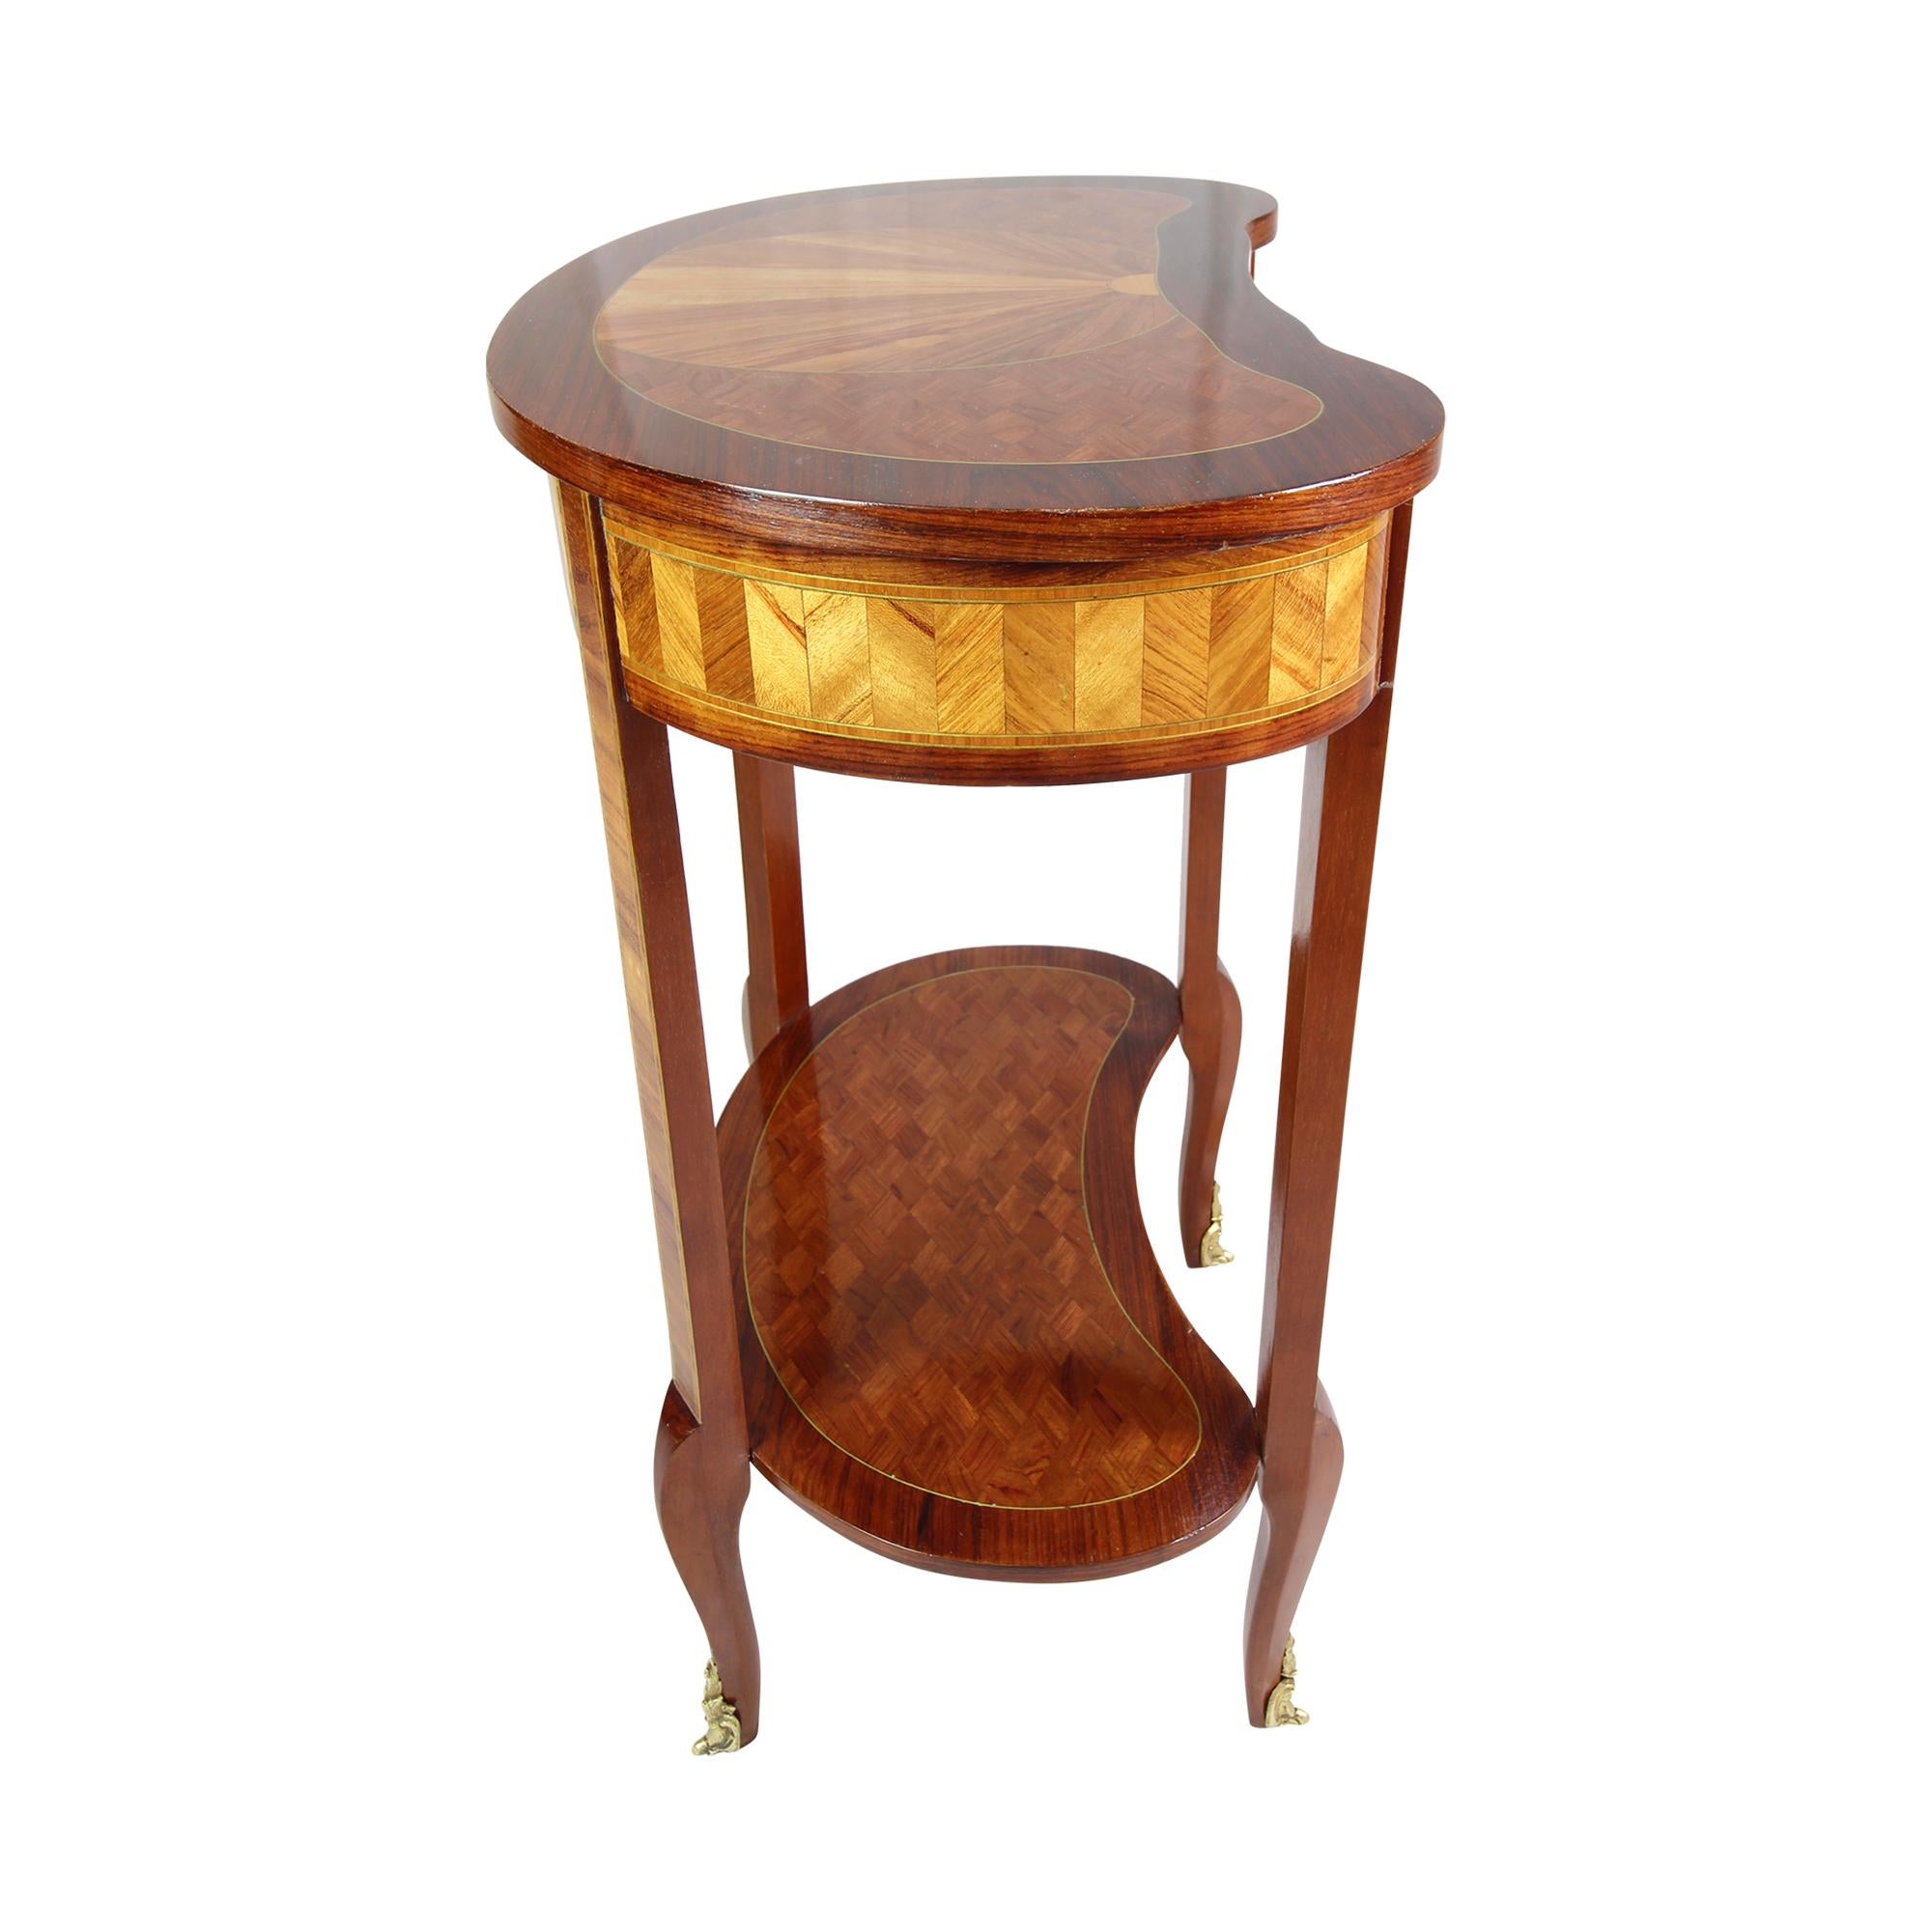 Beautiful side table in kidney shape with intricate marquetry work. The top can be folded up and underneath are three compartments. The top can also be closed. The feet finish with brass ornaments. The Louis XV Style side table comes from France and